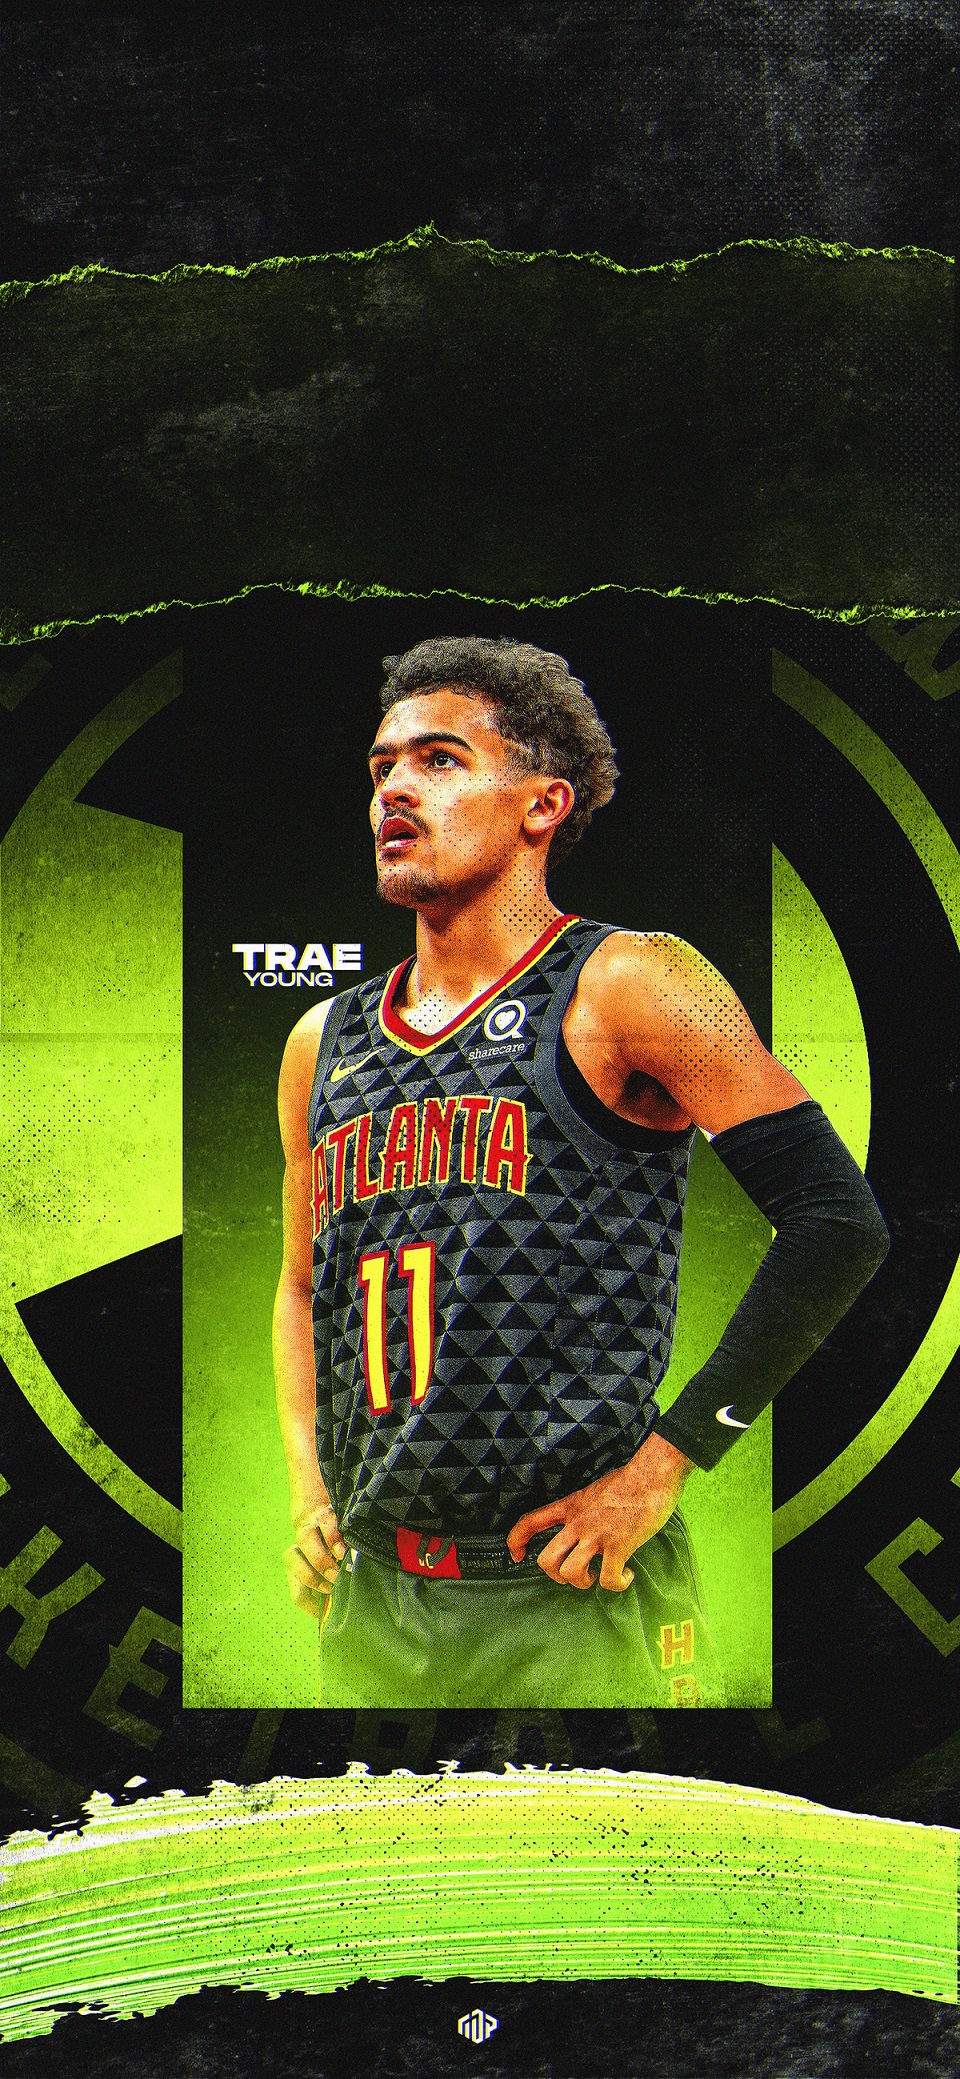 Trae Young Wallpapers Hd For Desktop And Phone Visual Arts Ideas